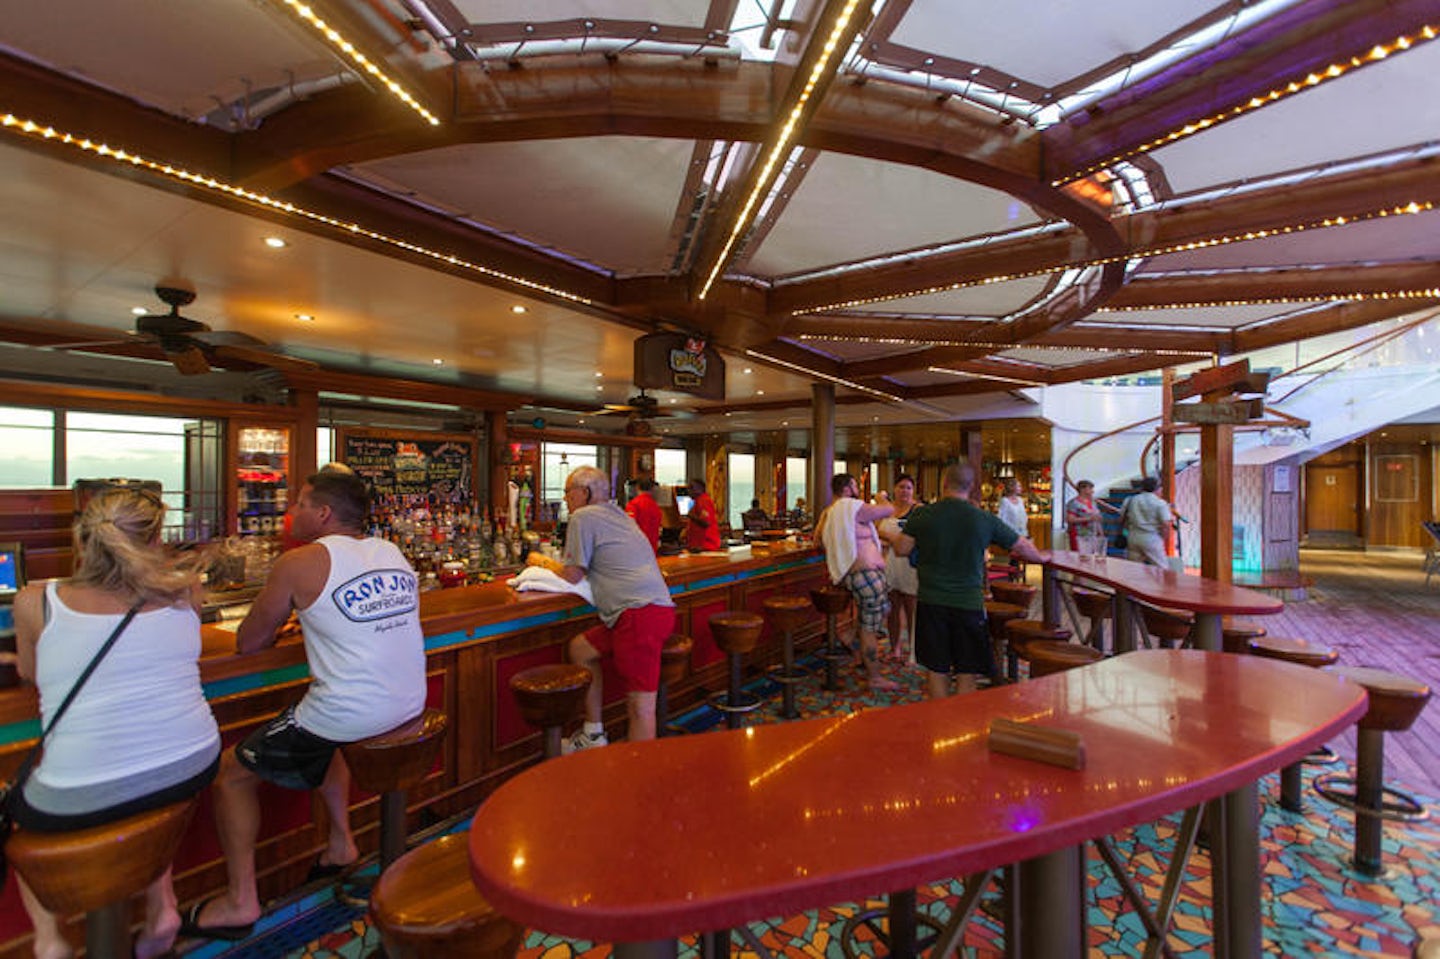 RedFrog Rum Bar on Carnival Conquest